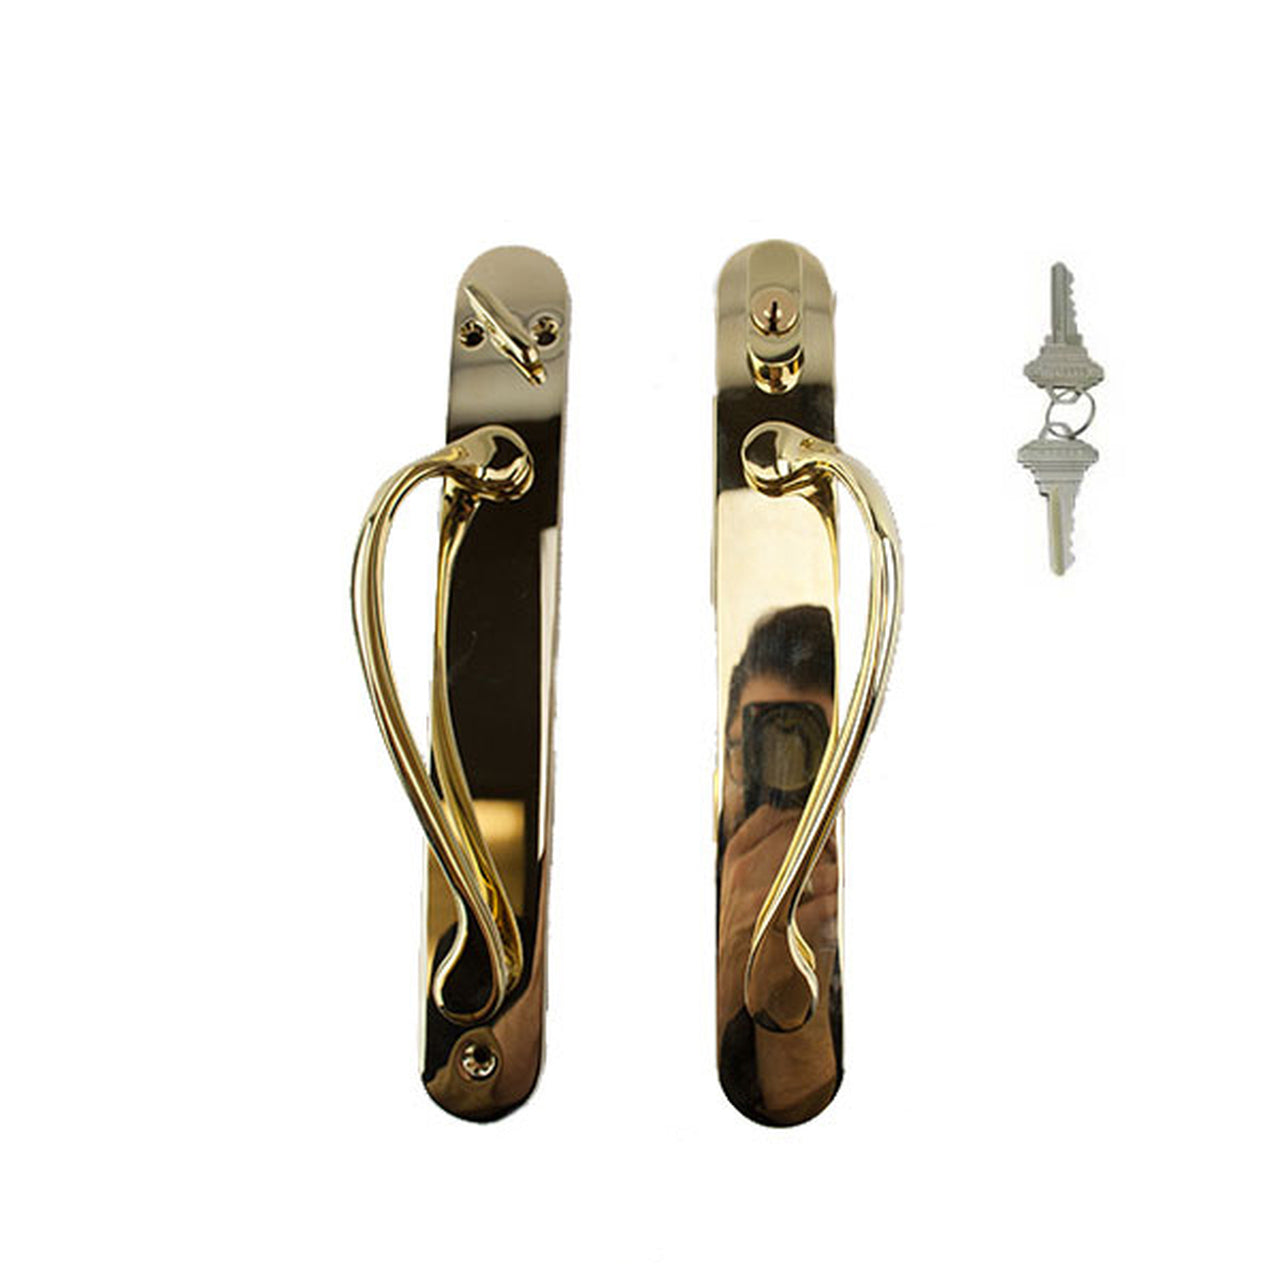 Old Style Traditional Sliding Door Handles